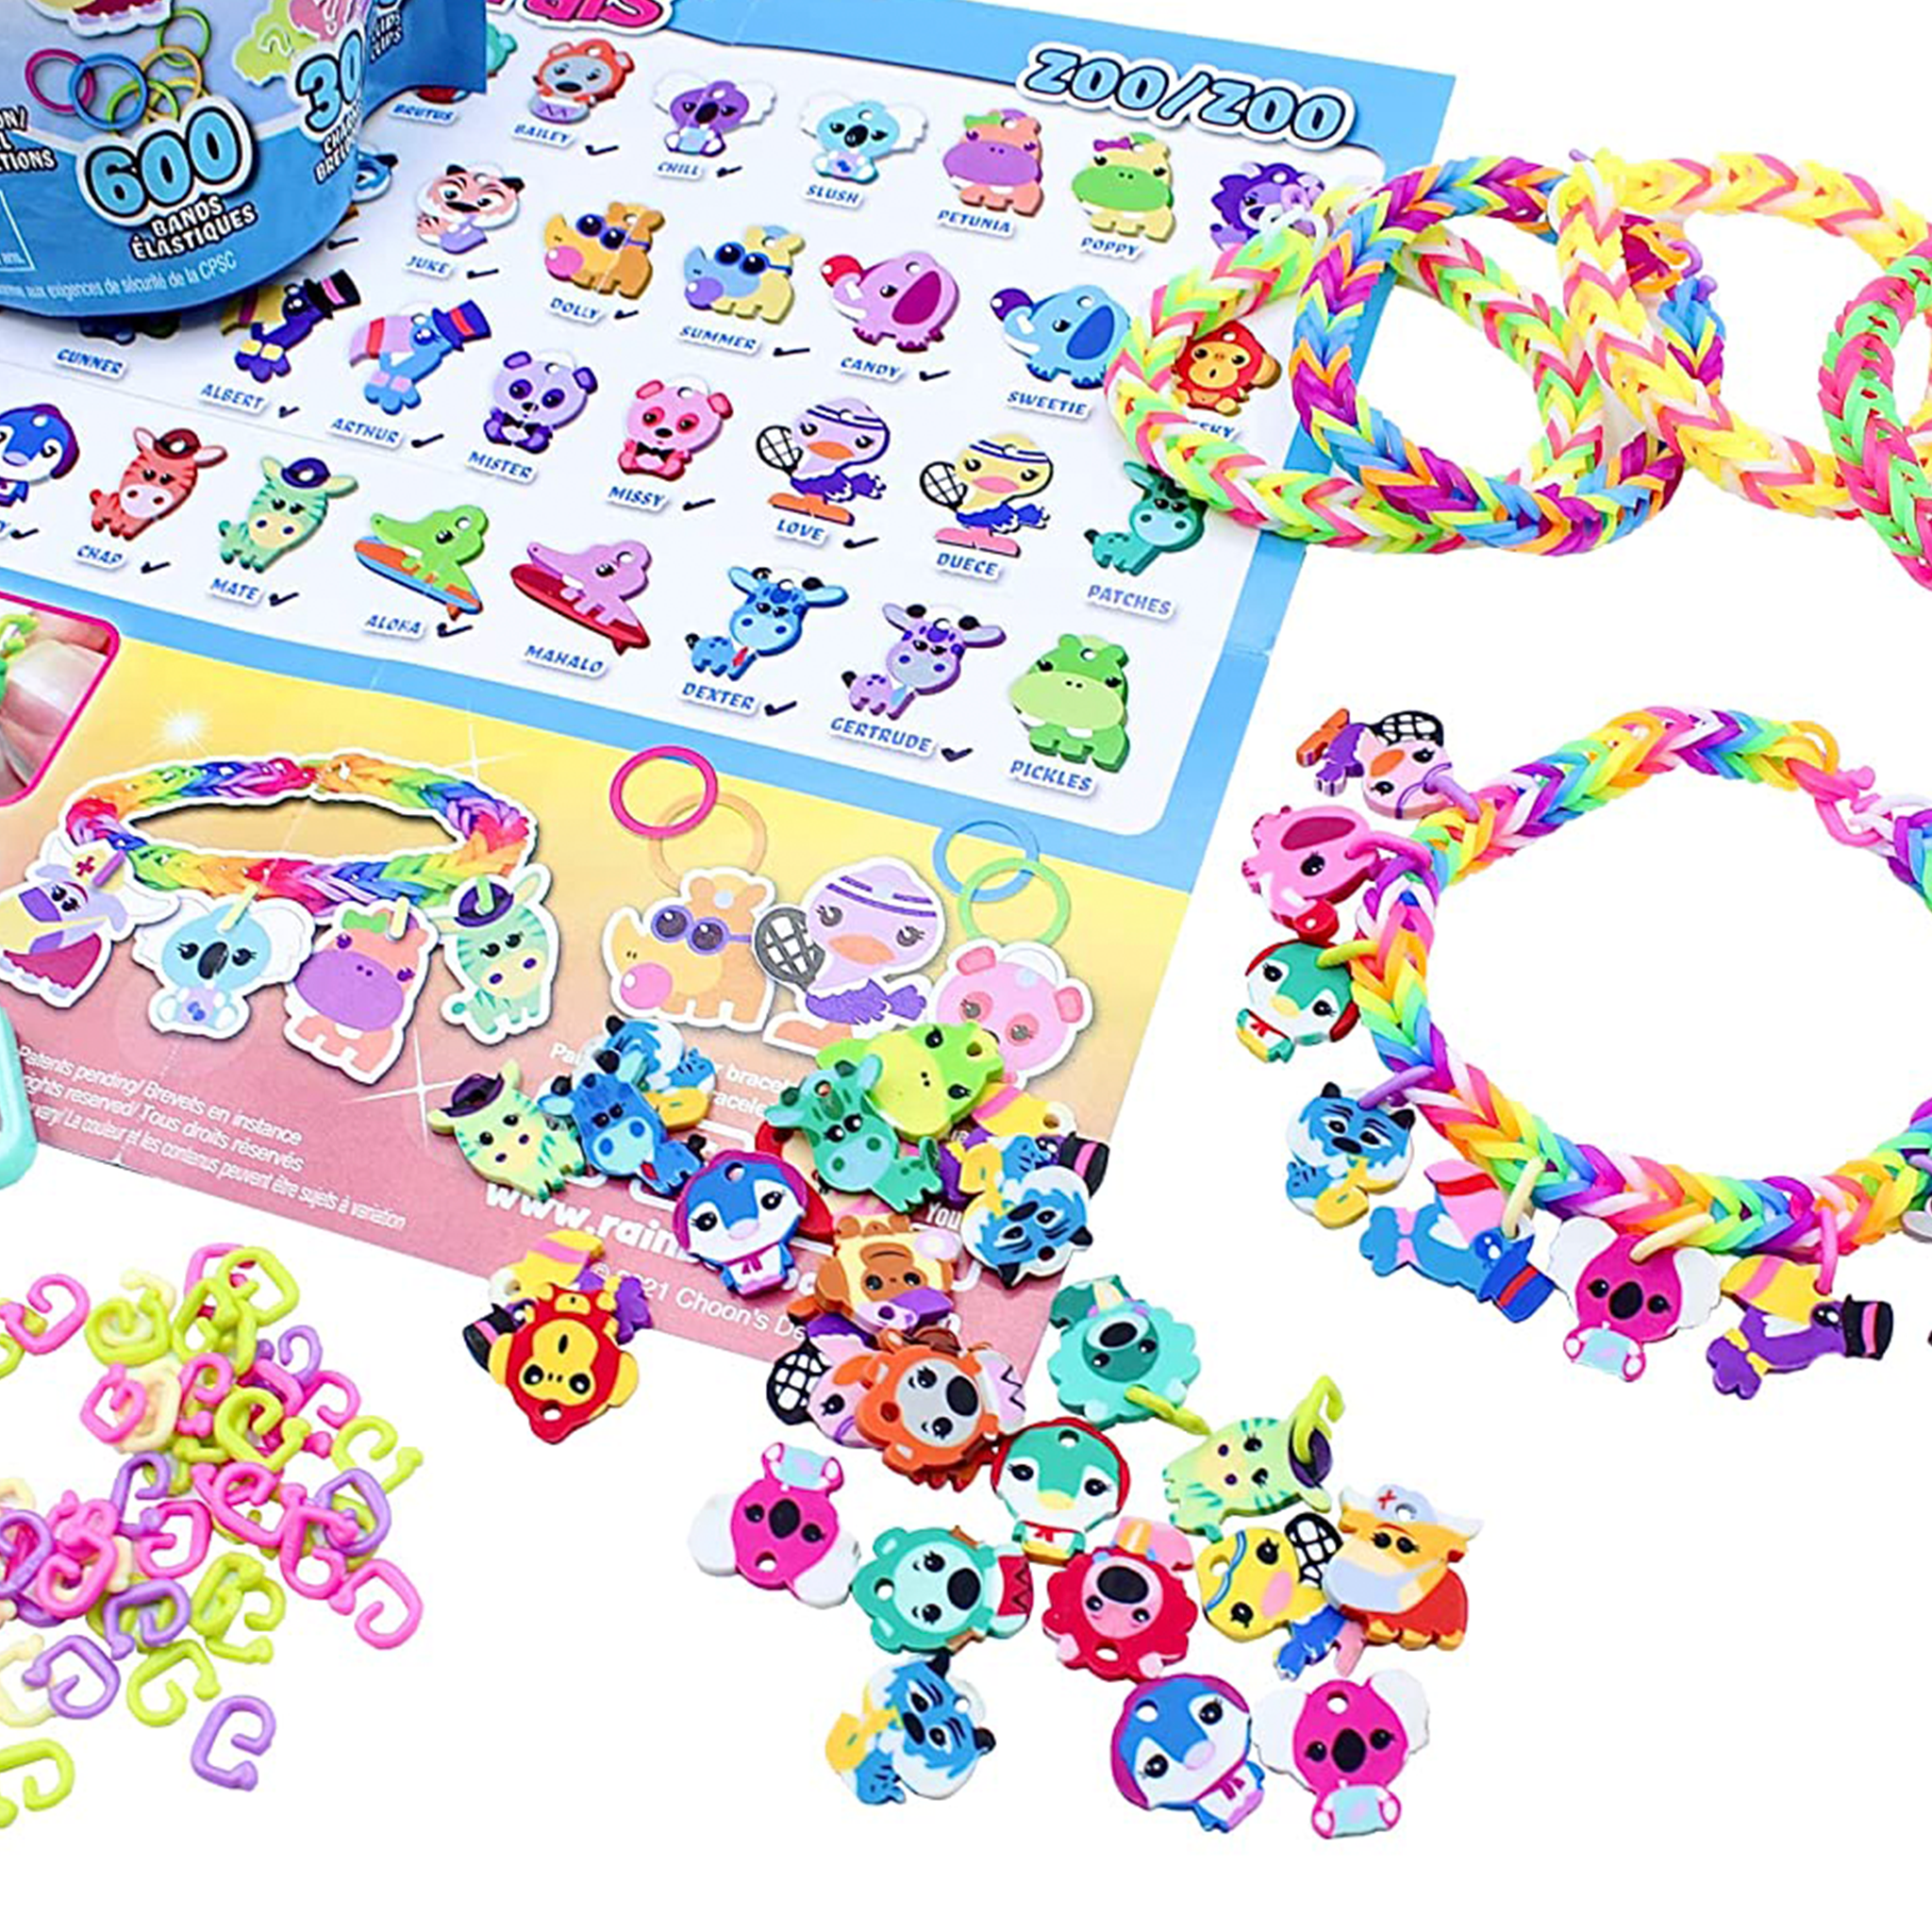 Rainbow Loom® Loomi-Pals™ Combo Set, Features 60 Cute Assorted LP Charms,  The New RL2.0, Happy Looms, Hooks, Alpha & Pony Beads, 2300 Colorful Bands